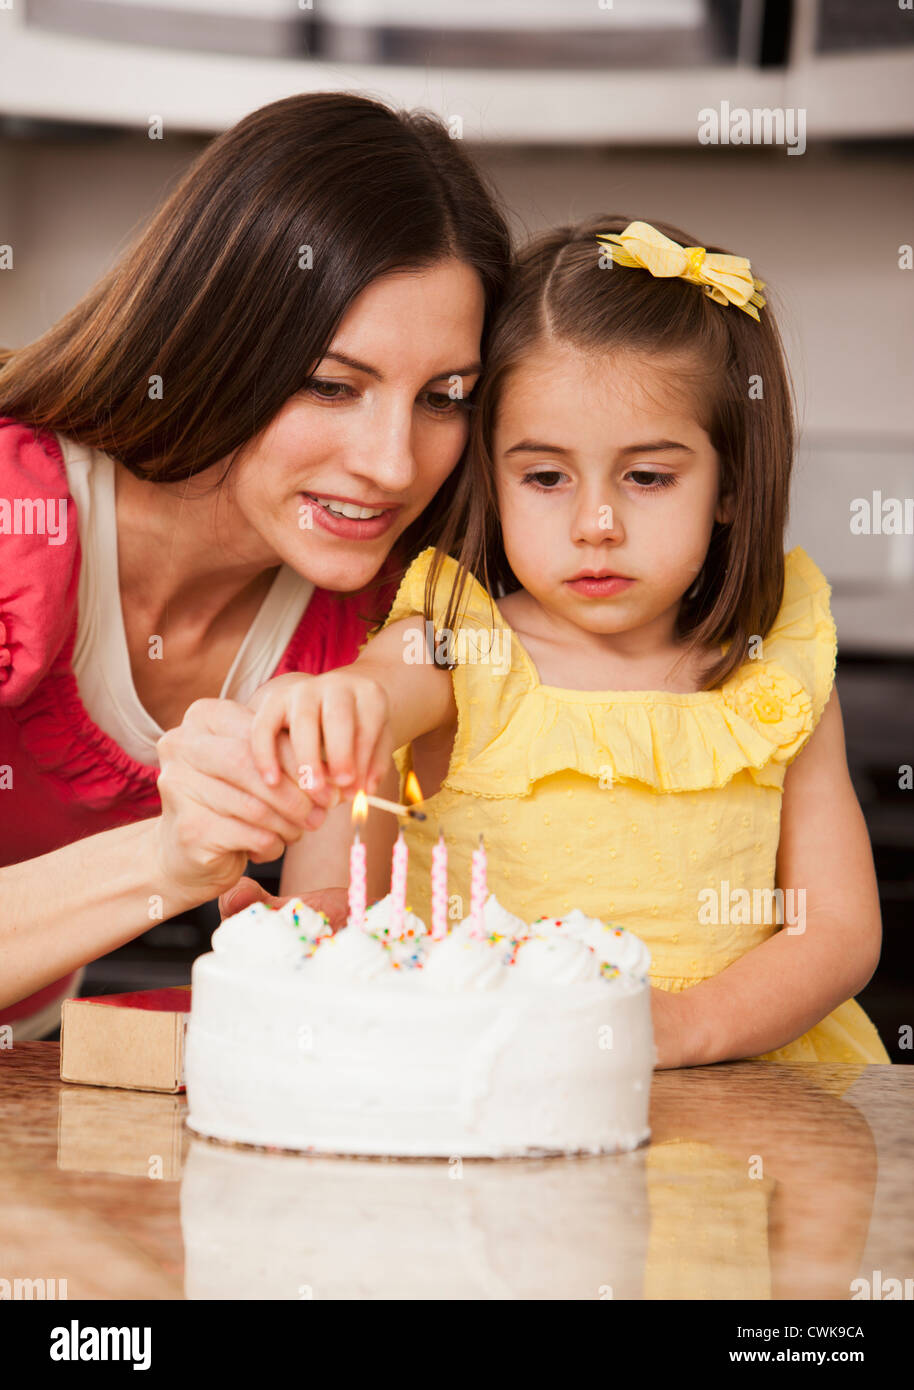 Caucasian mother and daughter lighting birthday candles Banque D'Images